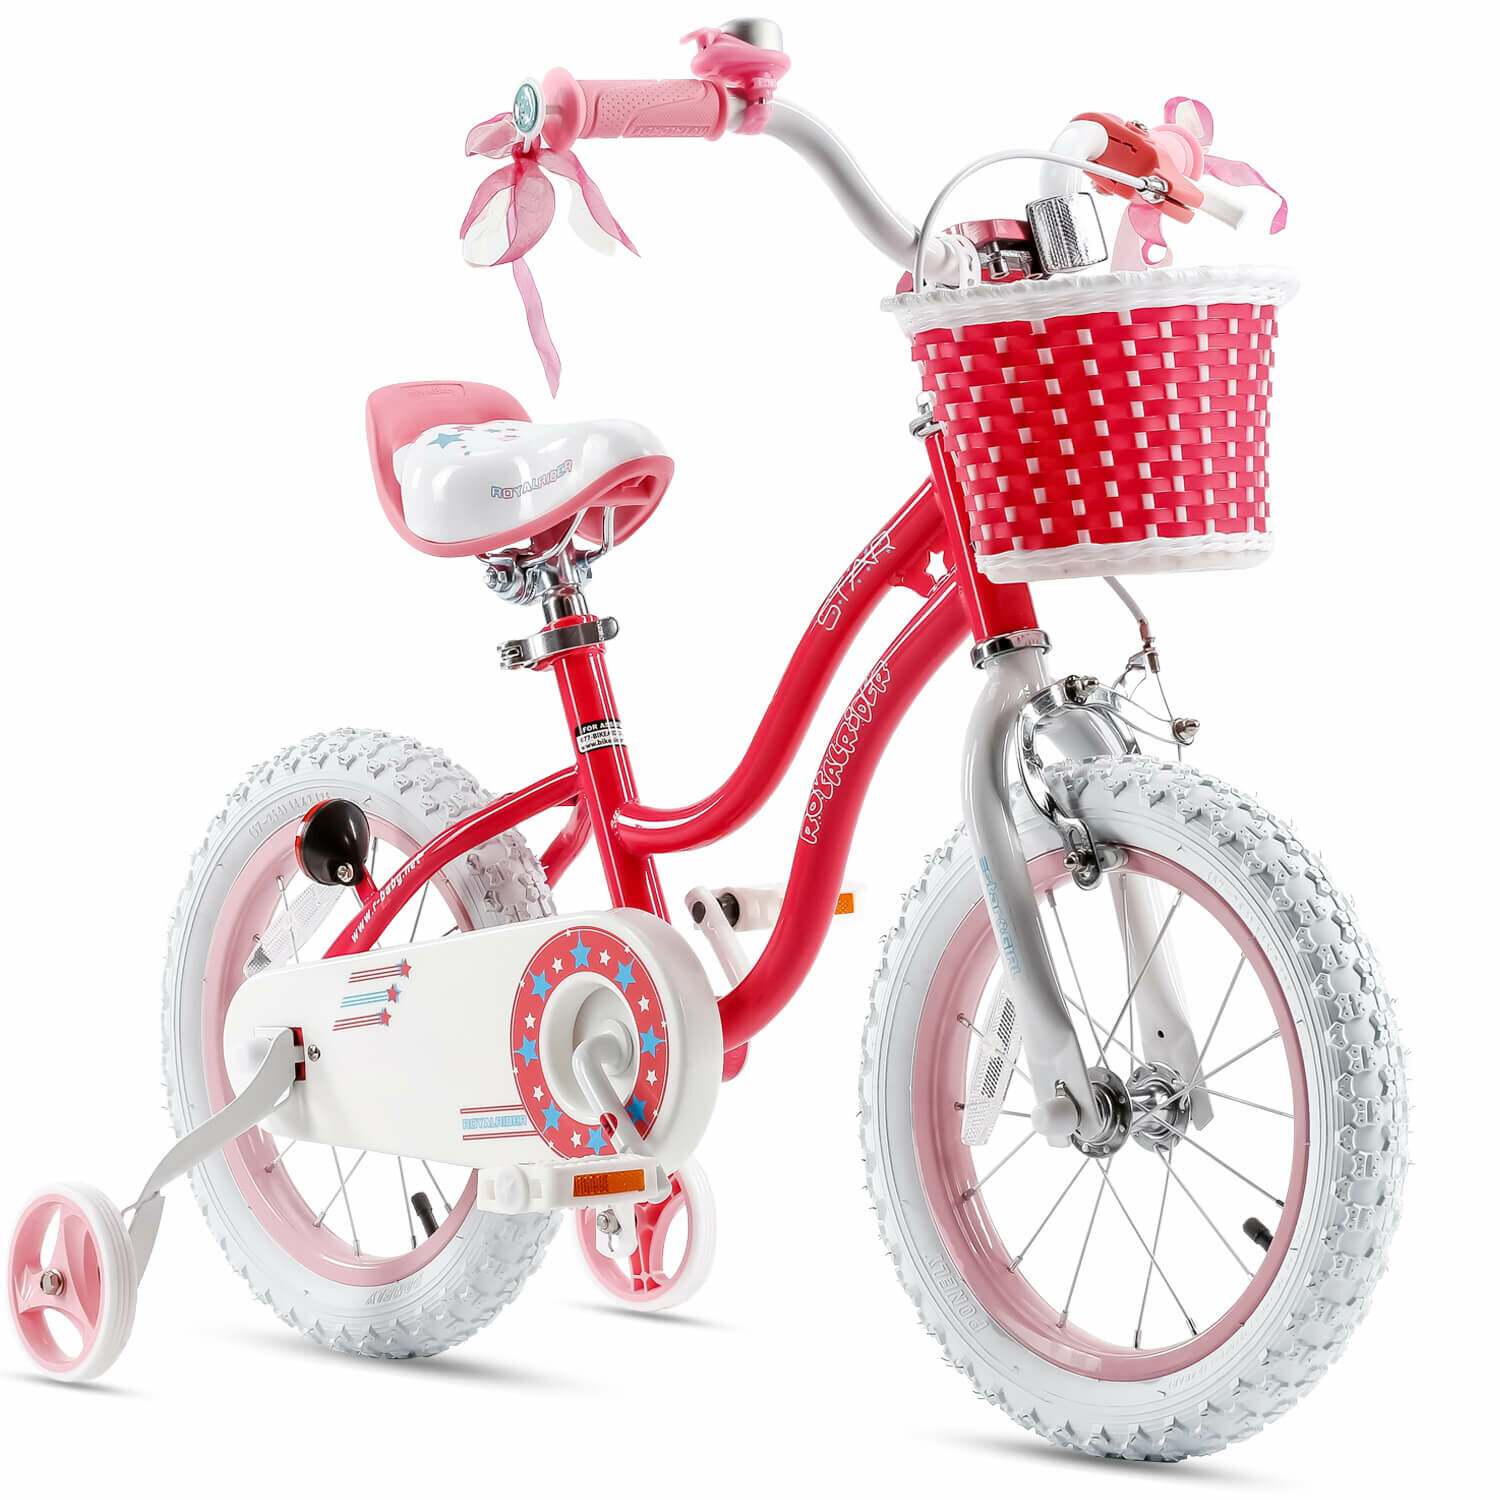 Image of [EU Direct] ROYALBABY STARGIRL 14 Inch Children's Bike Two Brake System Kids Bicycle With Training Wheel For 3~5 Years o